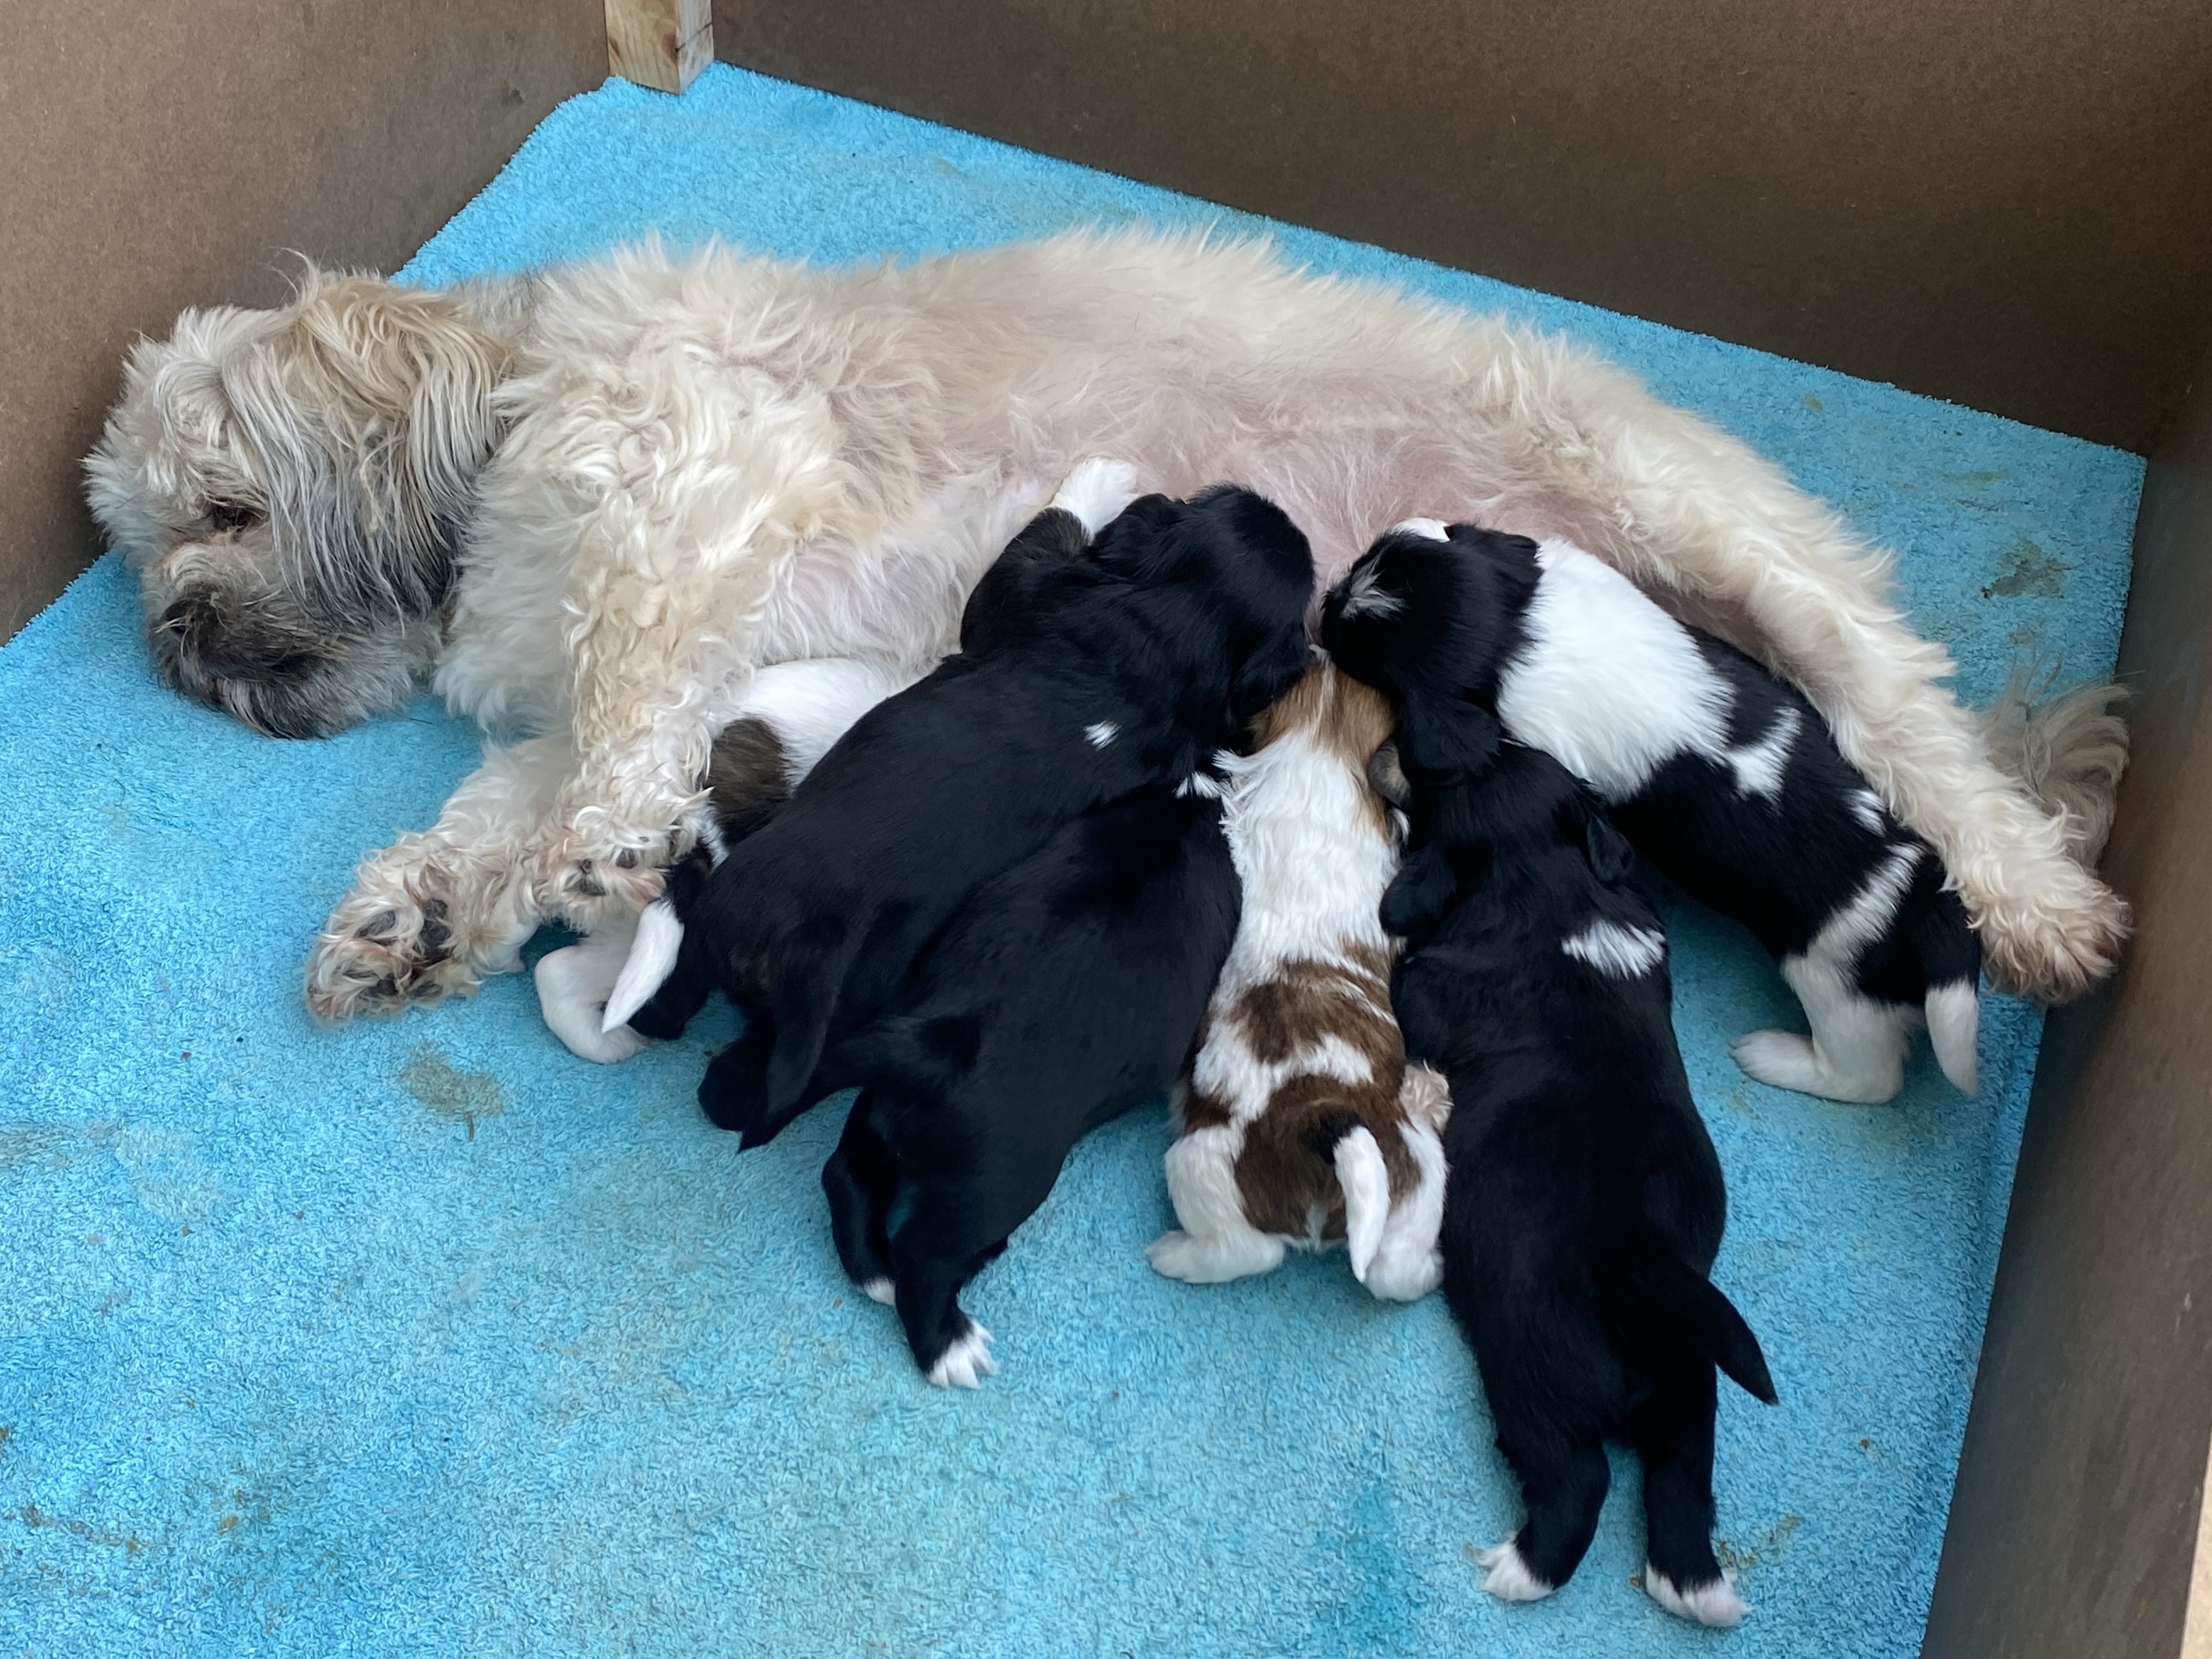 All pups with mum